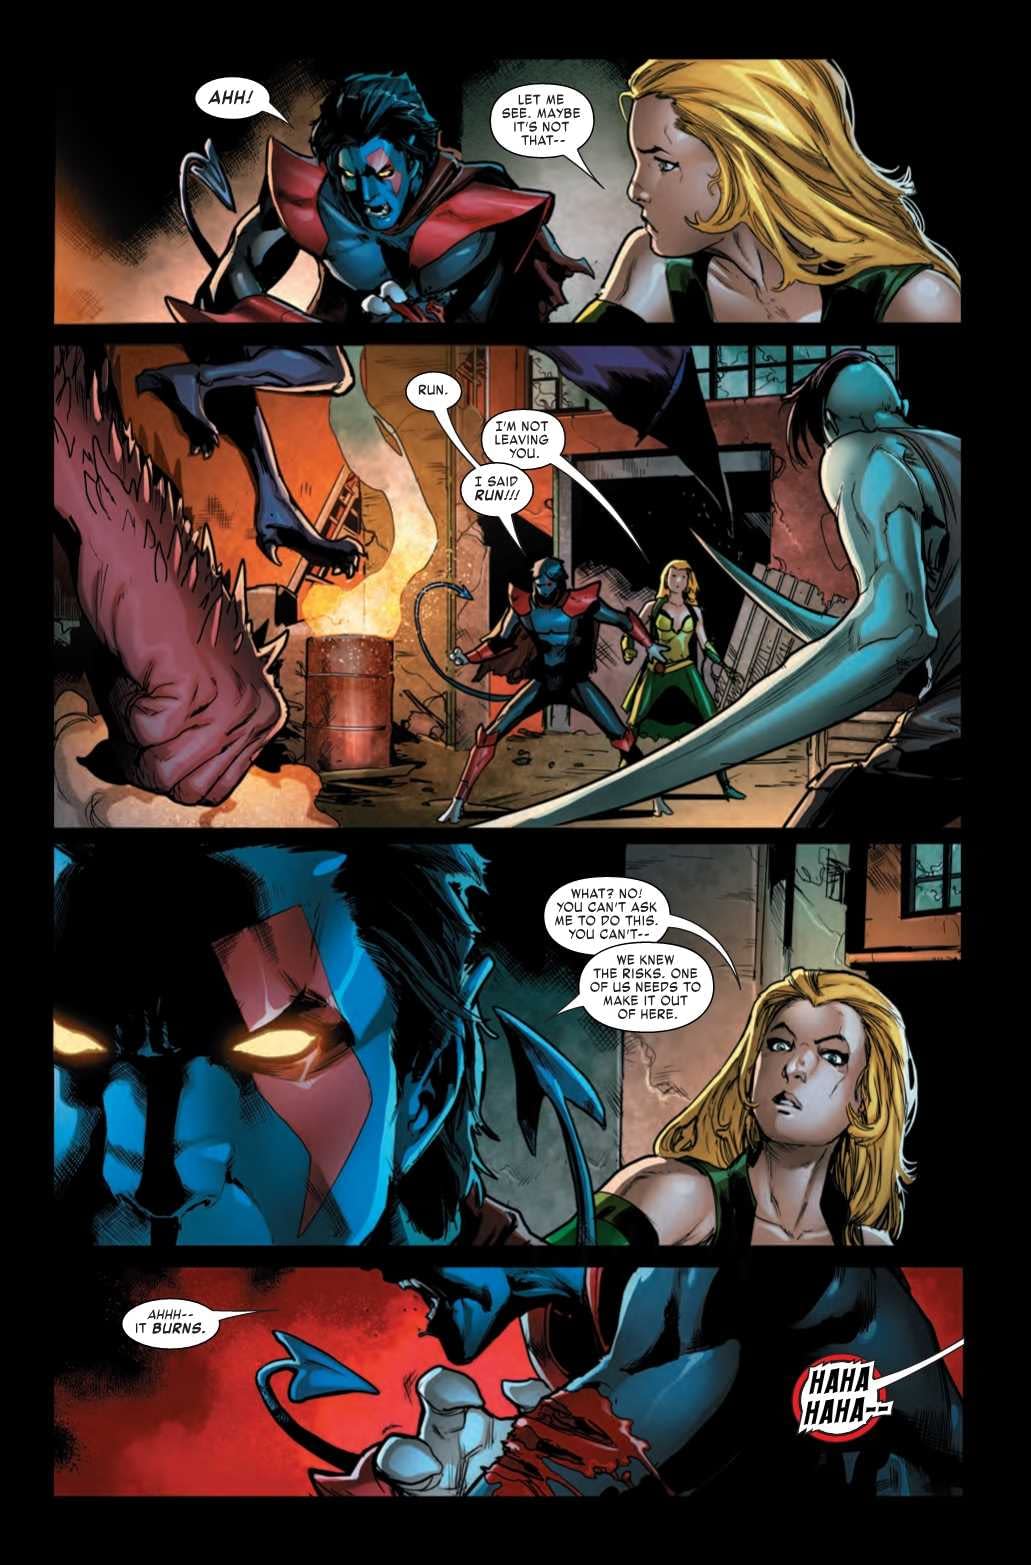 Is Everyone an Anti-Vaxxer in the Age X-Man? Next Week's Amazing Nightcrawler #1 (Preview)